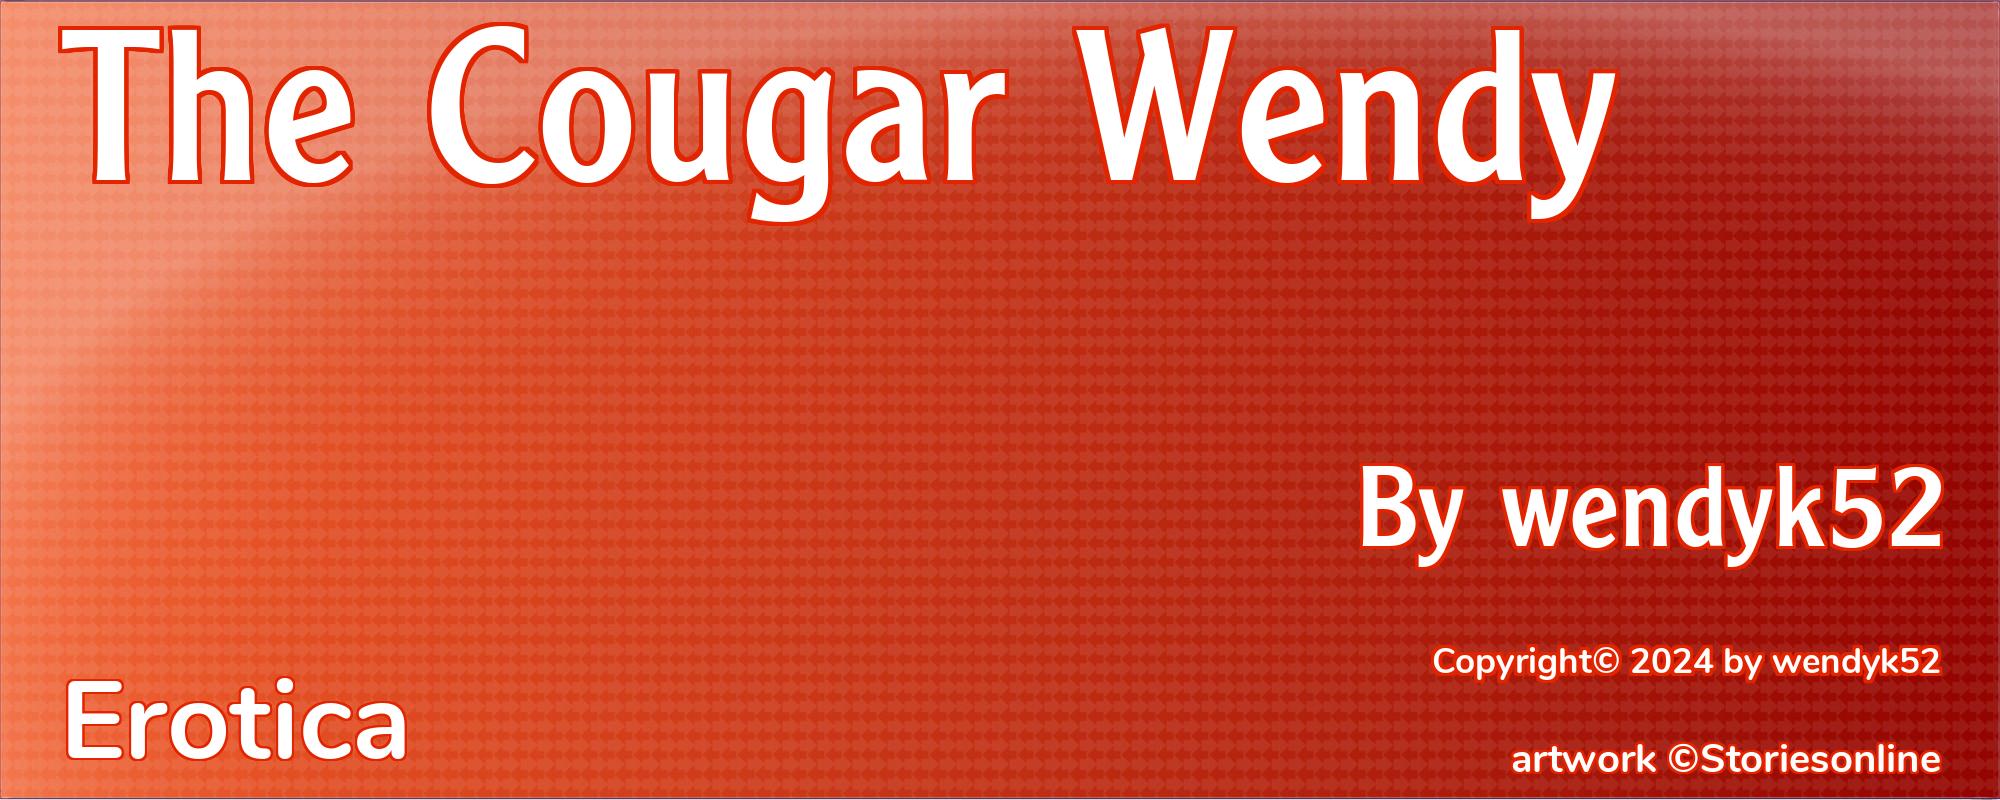 The Cougar Wendy - Cover